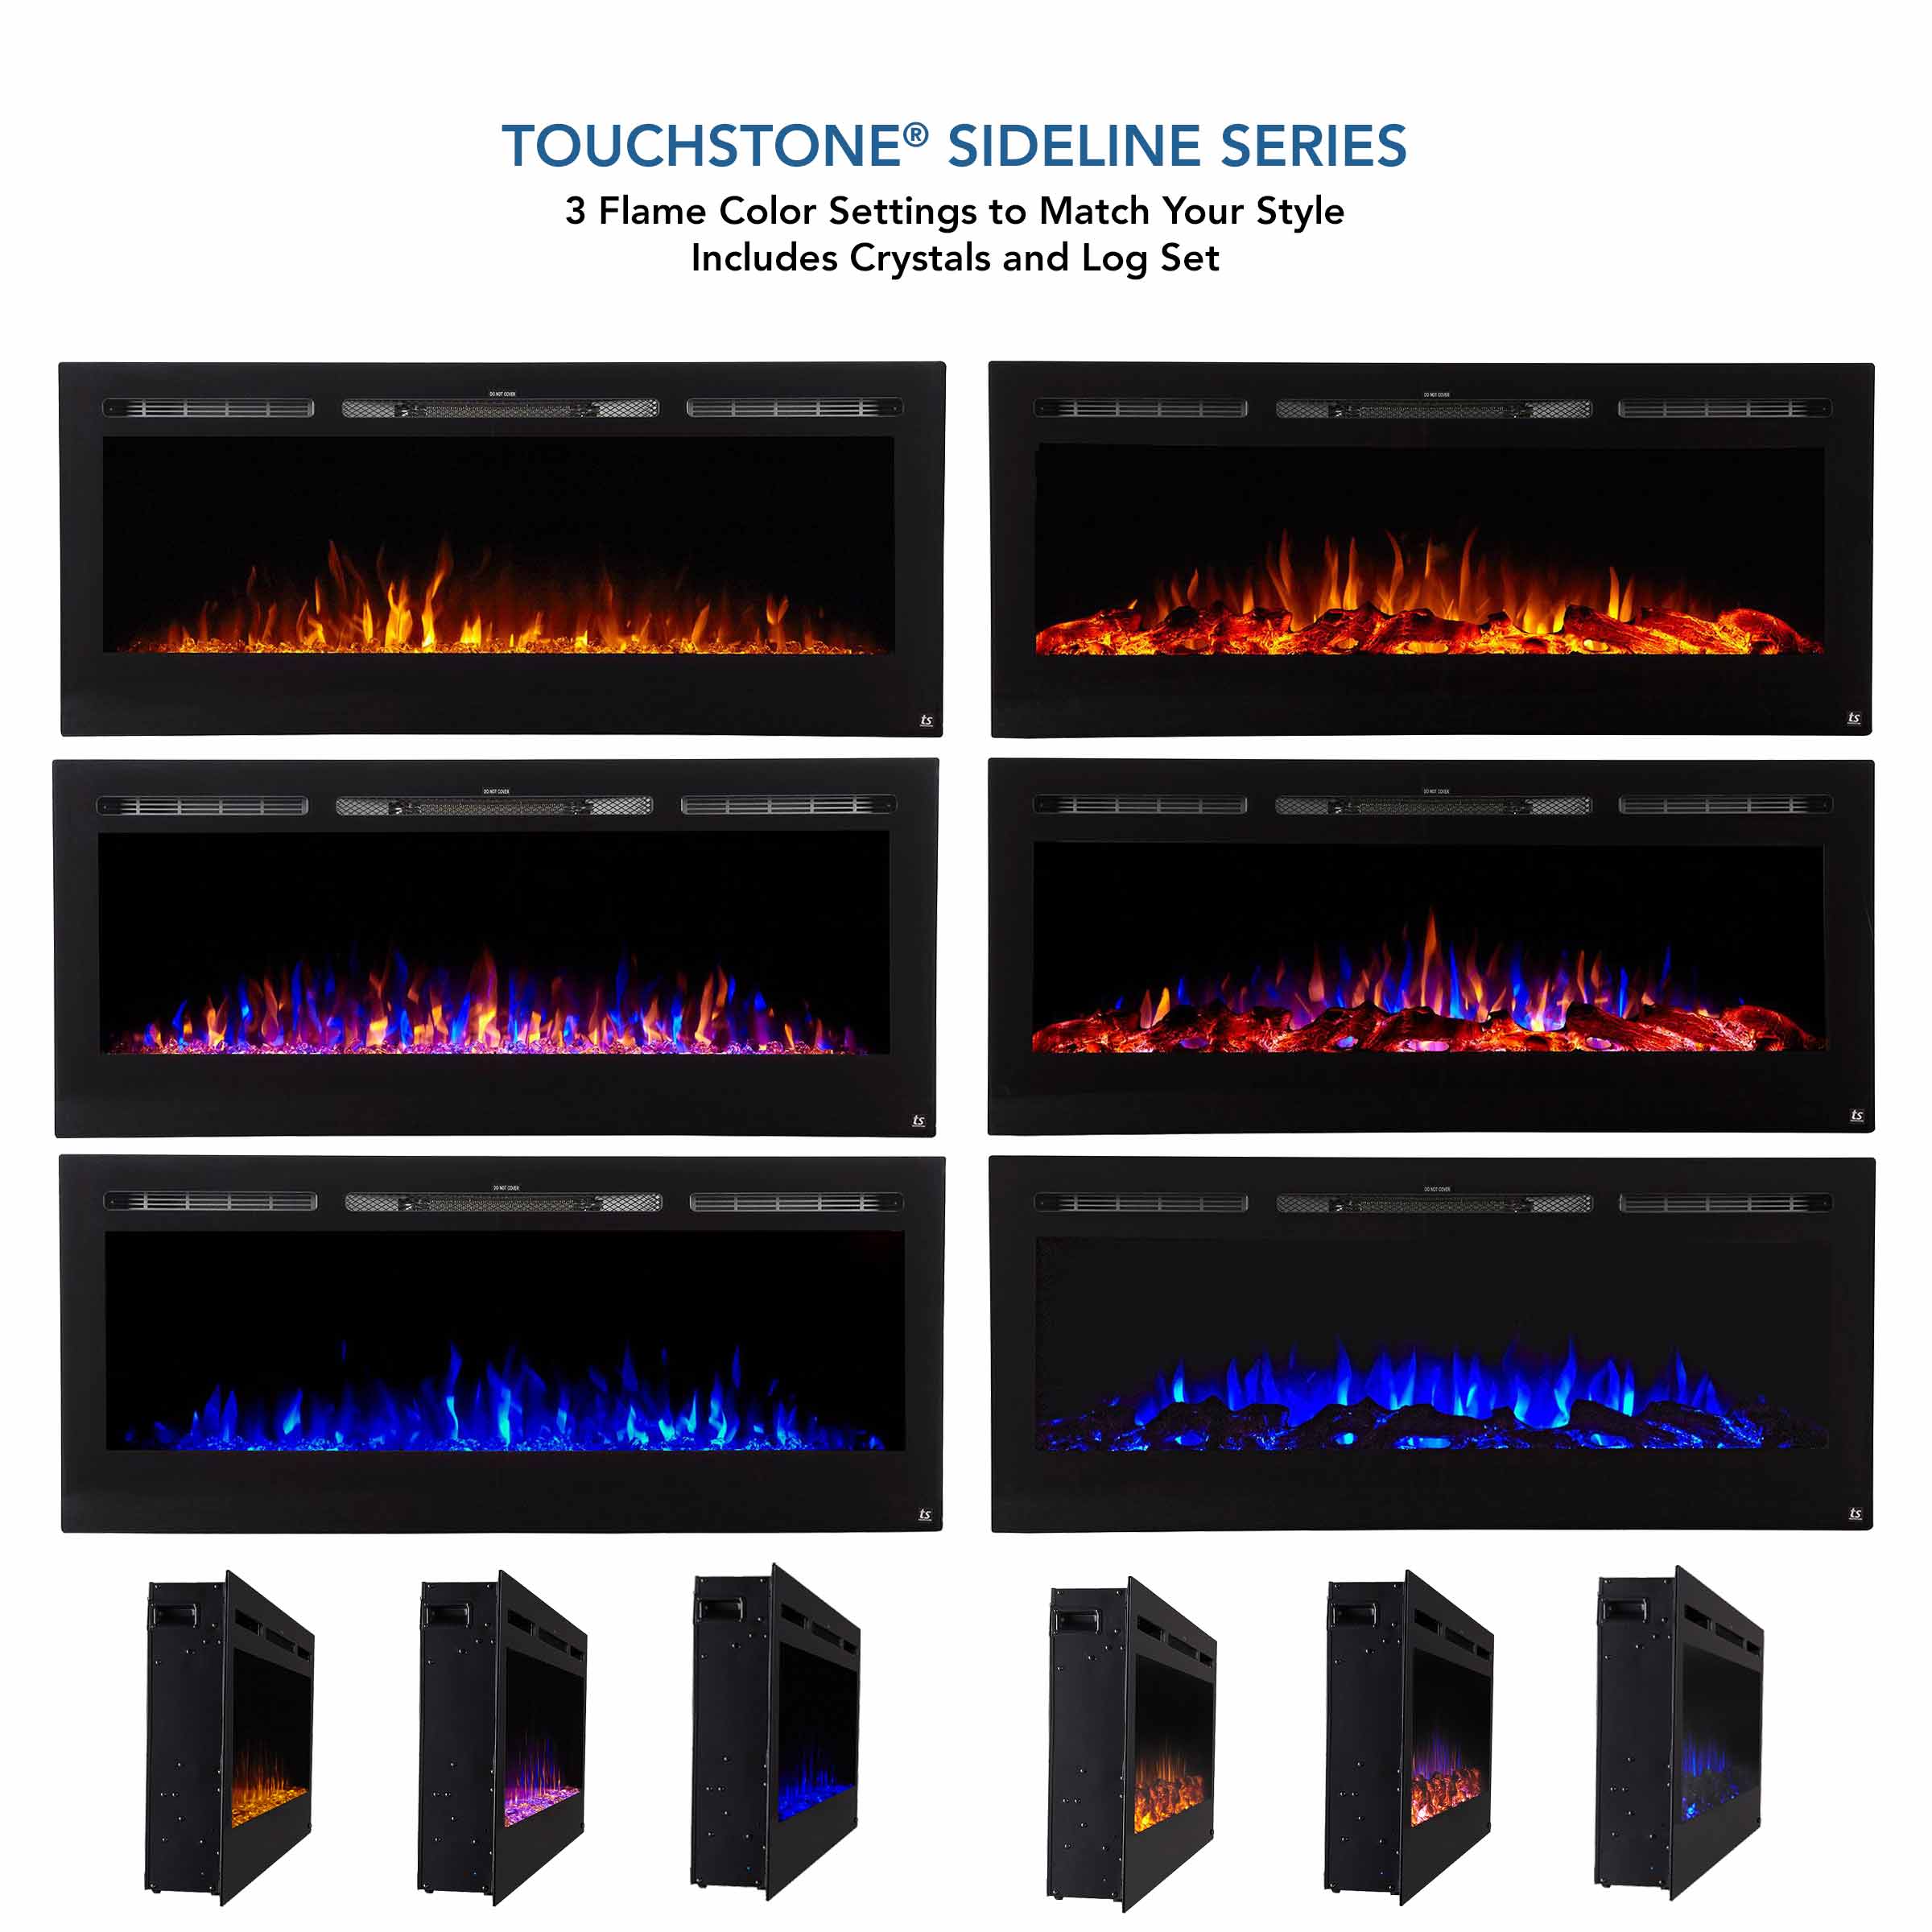 Touchstone Sideline Electric Fireplace Series flame colors and media options